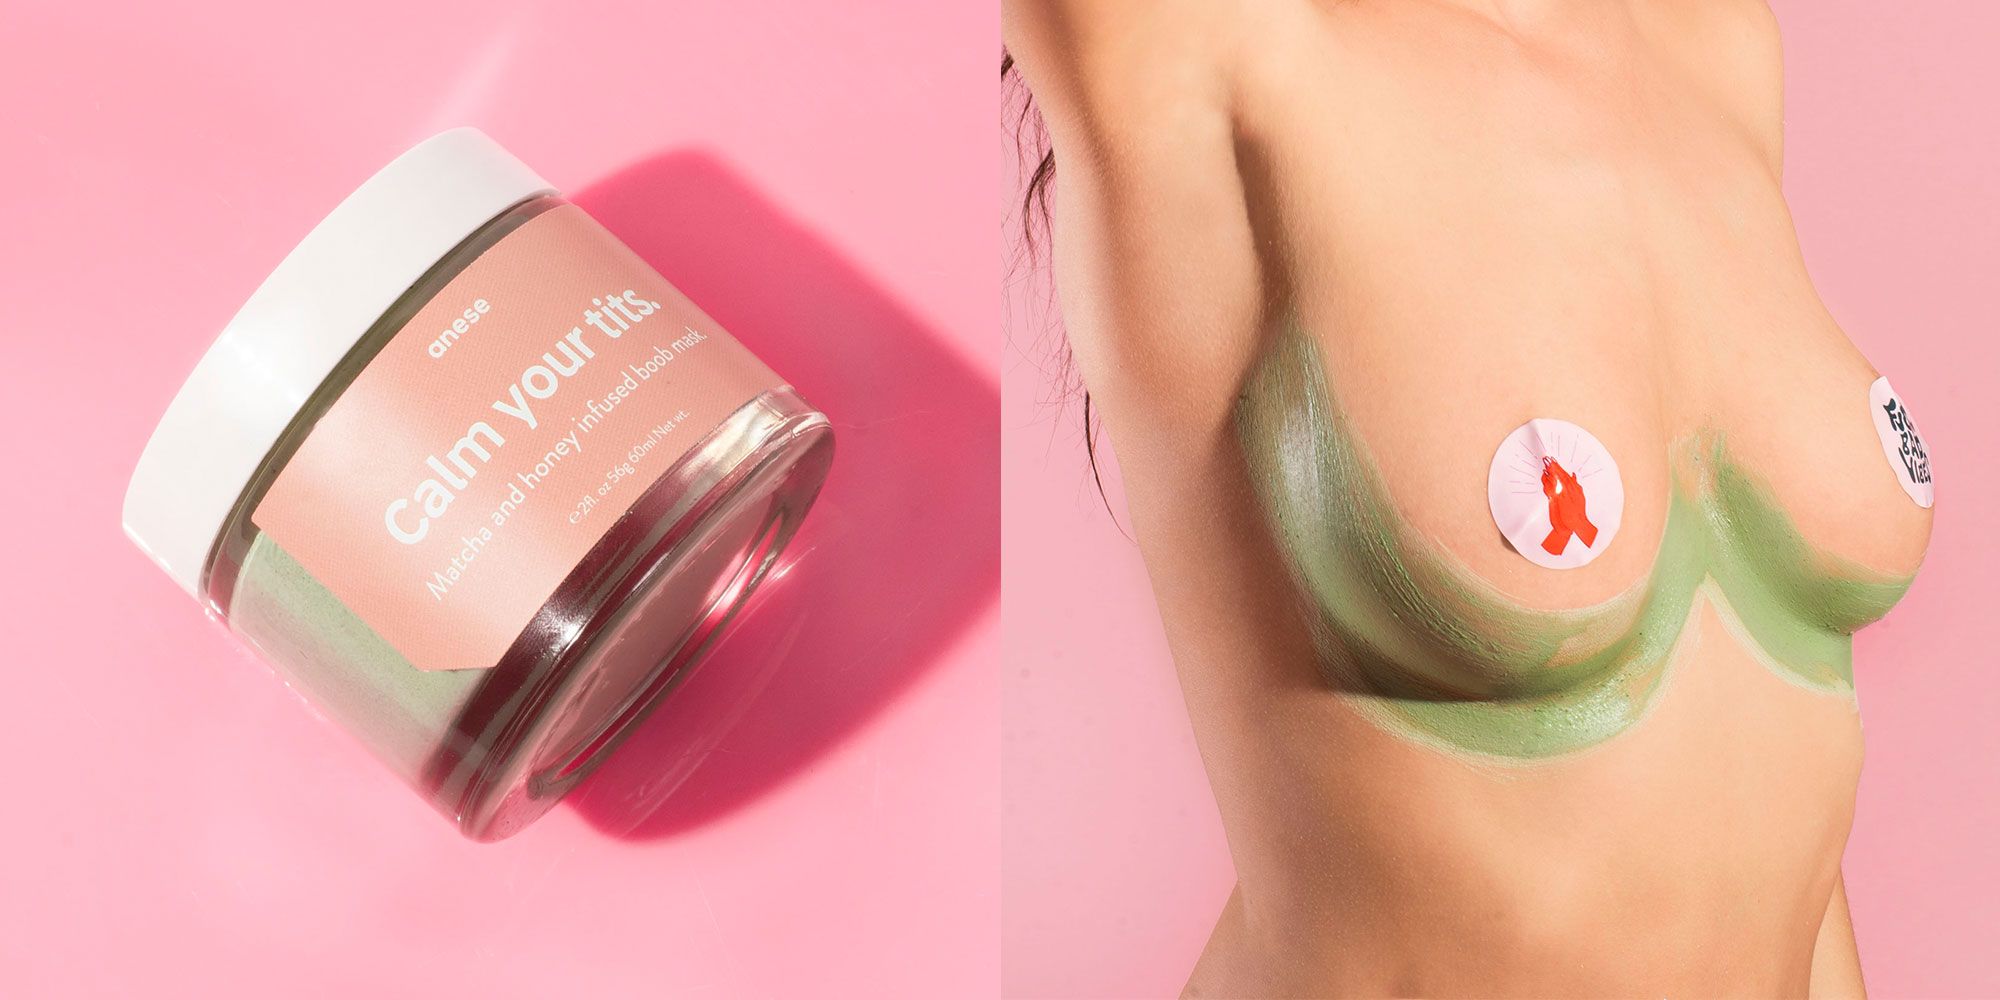 Calm Your Tits - Firming and Nourishing Boob Mask – Anese Skin